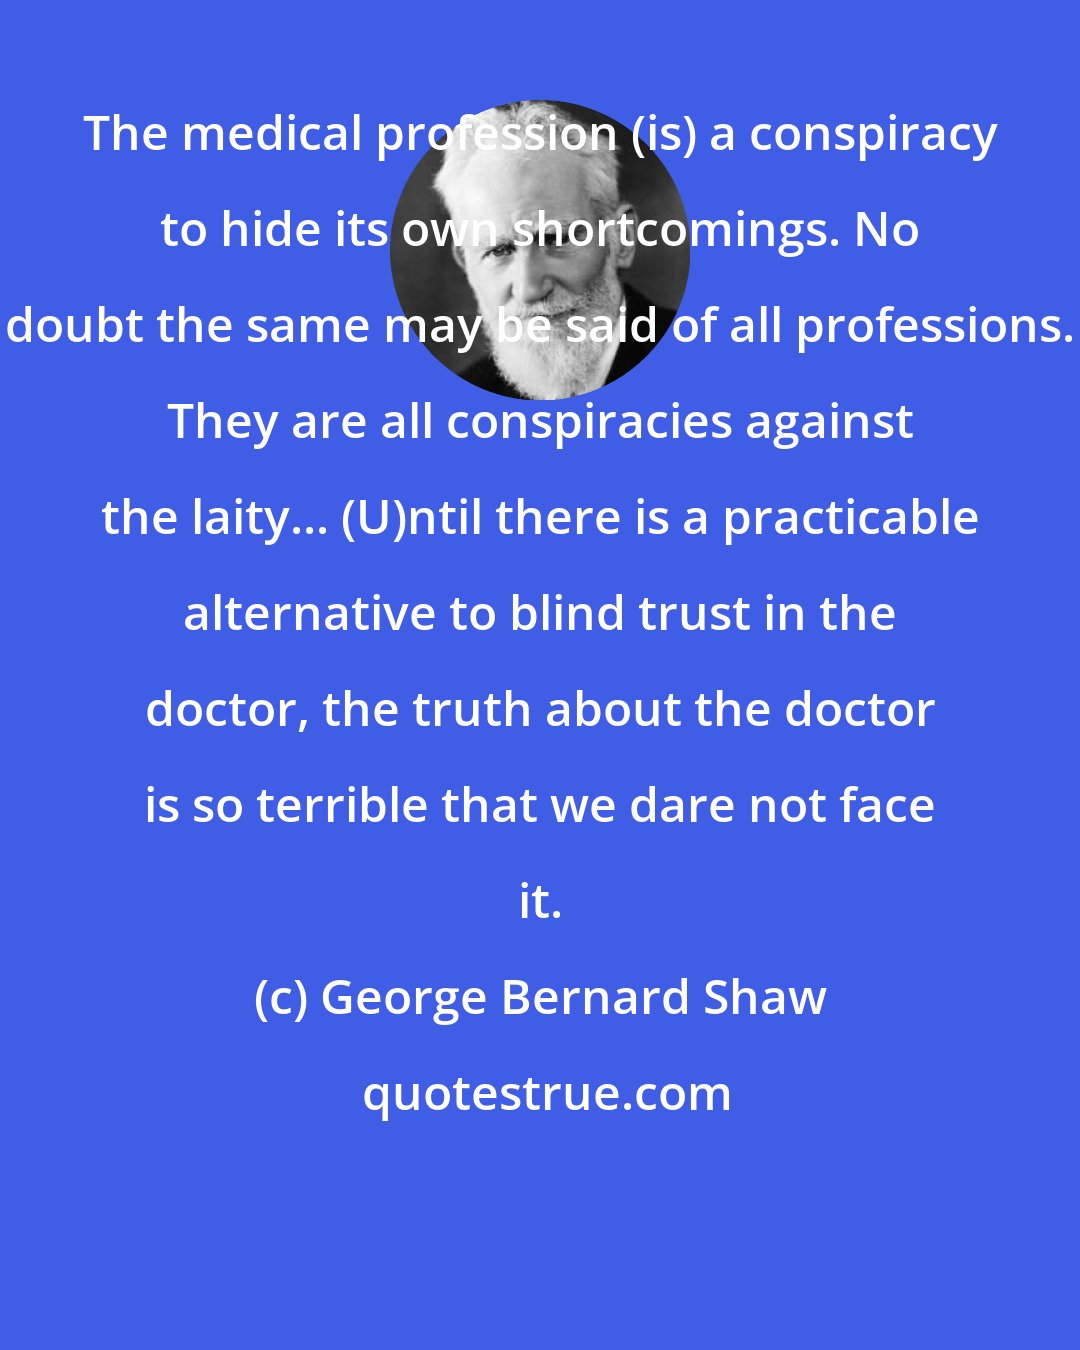 George Bernard Shaw: The medical profession (is) a conspiracy to hide its own shortcomings. No doubt the same may be said of all professions. They are all conspiracies against the laity... (U)ntil there is a practicable alternative to blind trust in the doctor, the truth about the doctor is so terrible that we dare not face it.